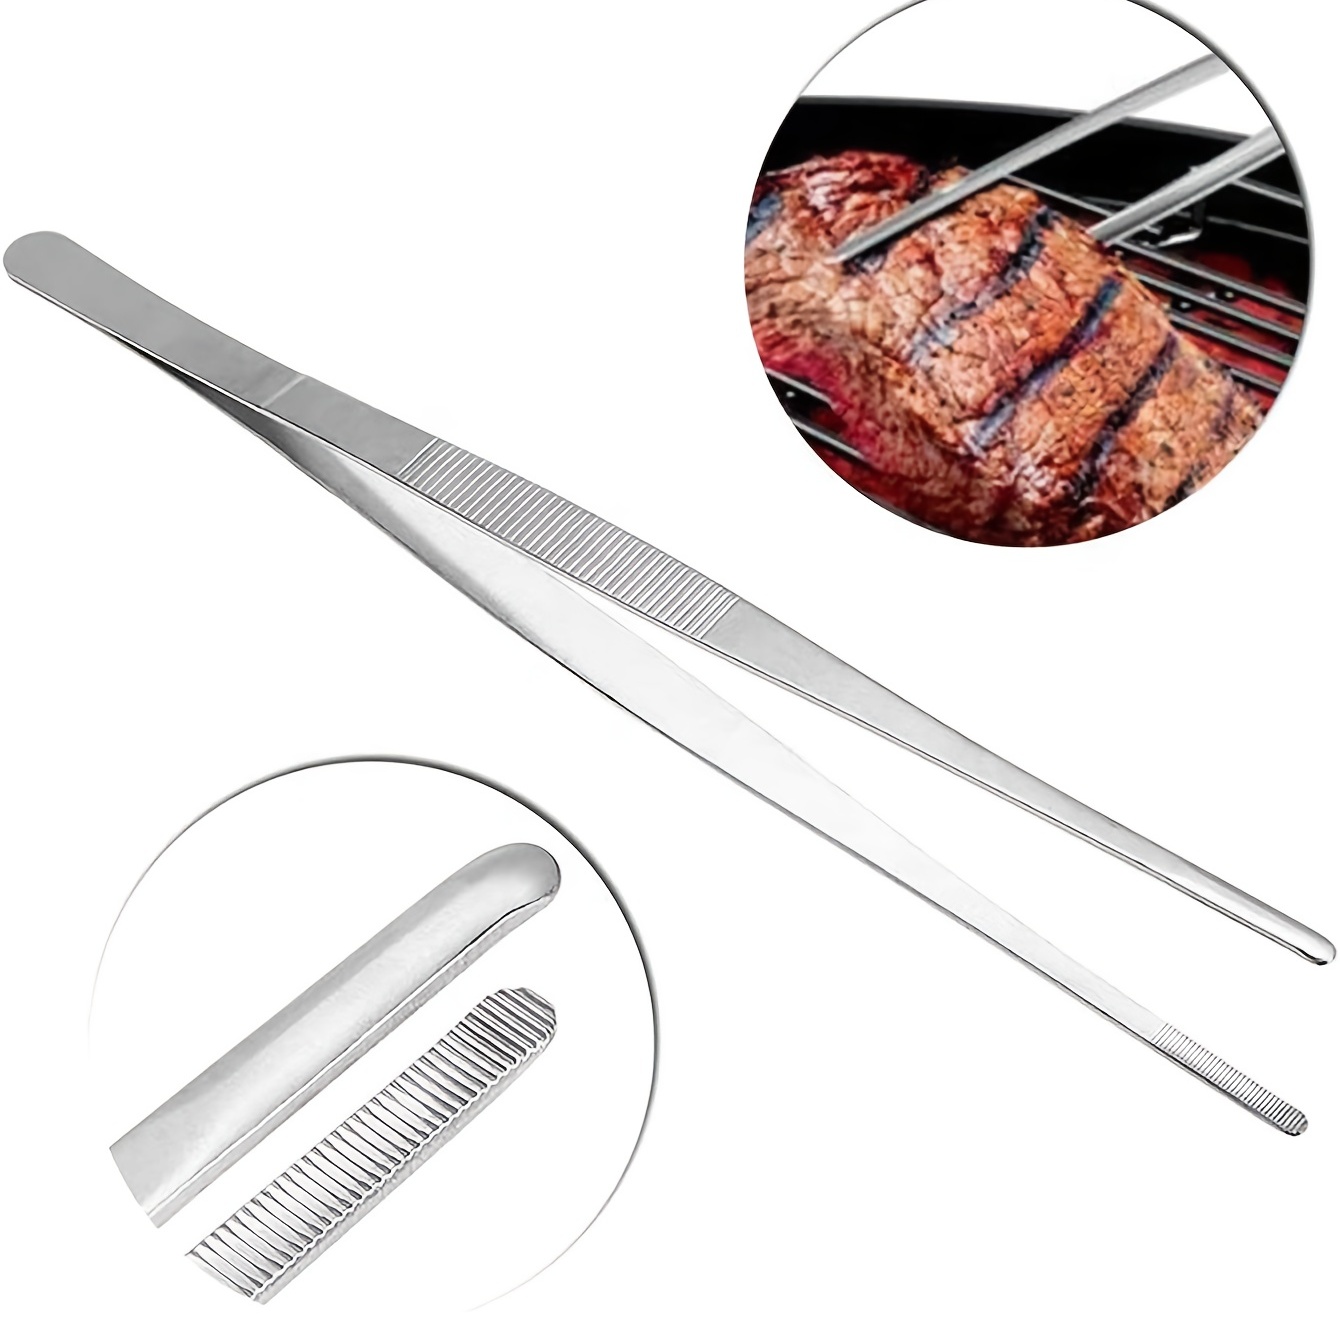 1pcs Stainless-Steel Kitchen Straight Grill Tweezers BBQ Food Tongs Tools